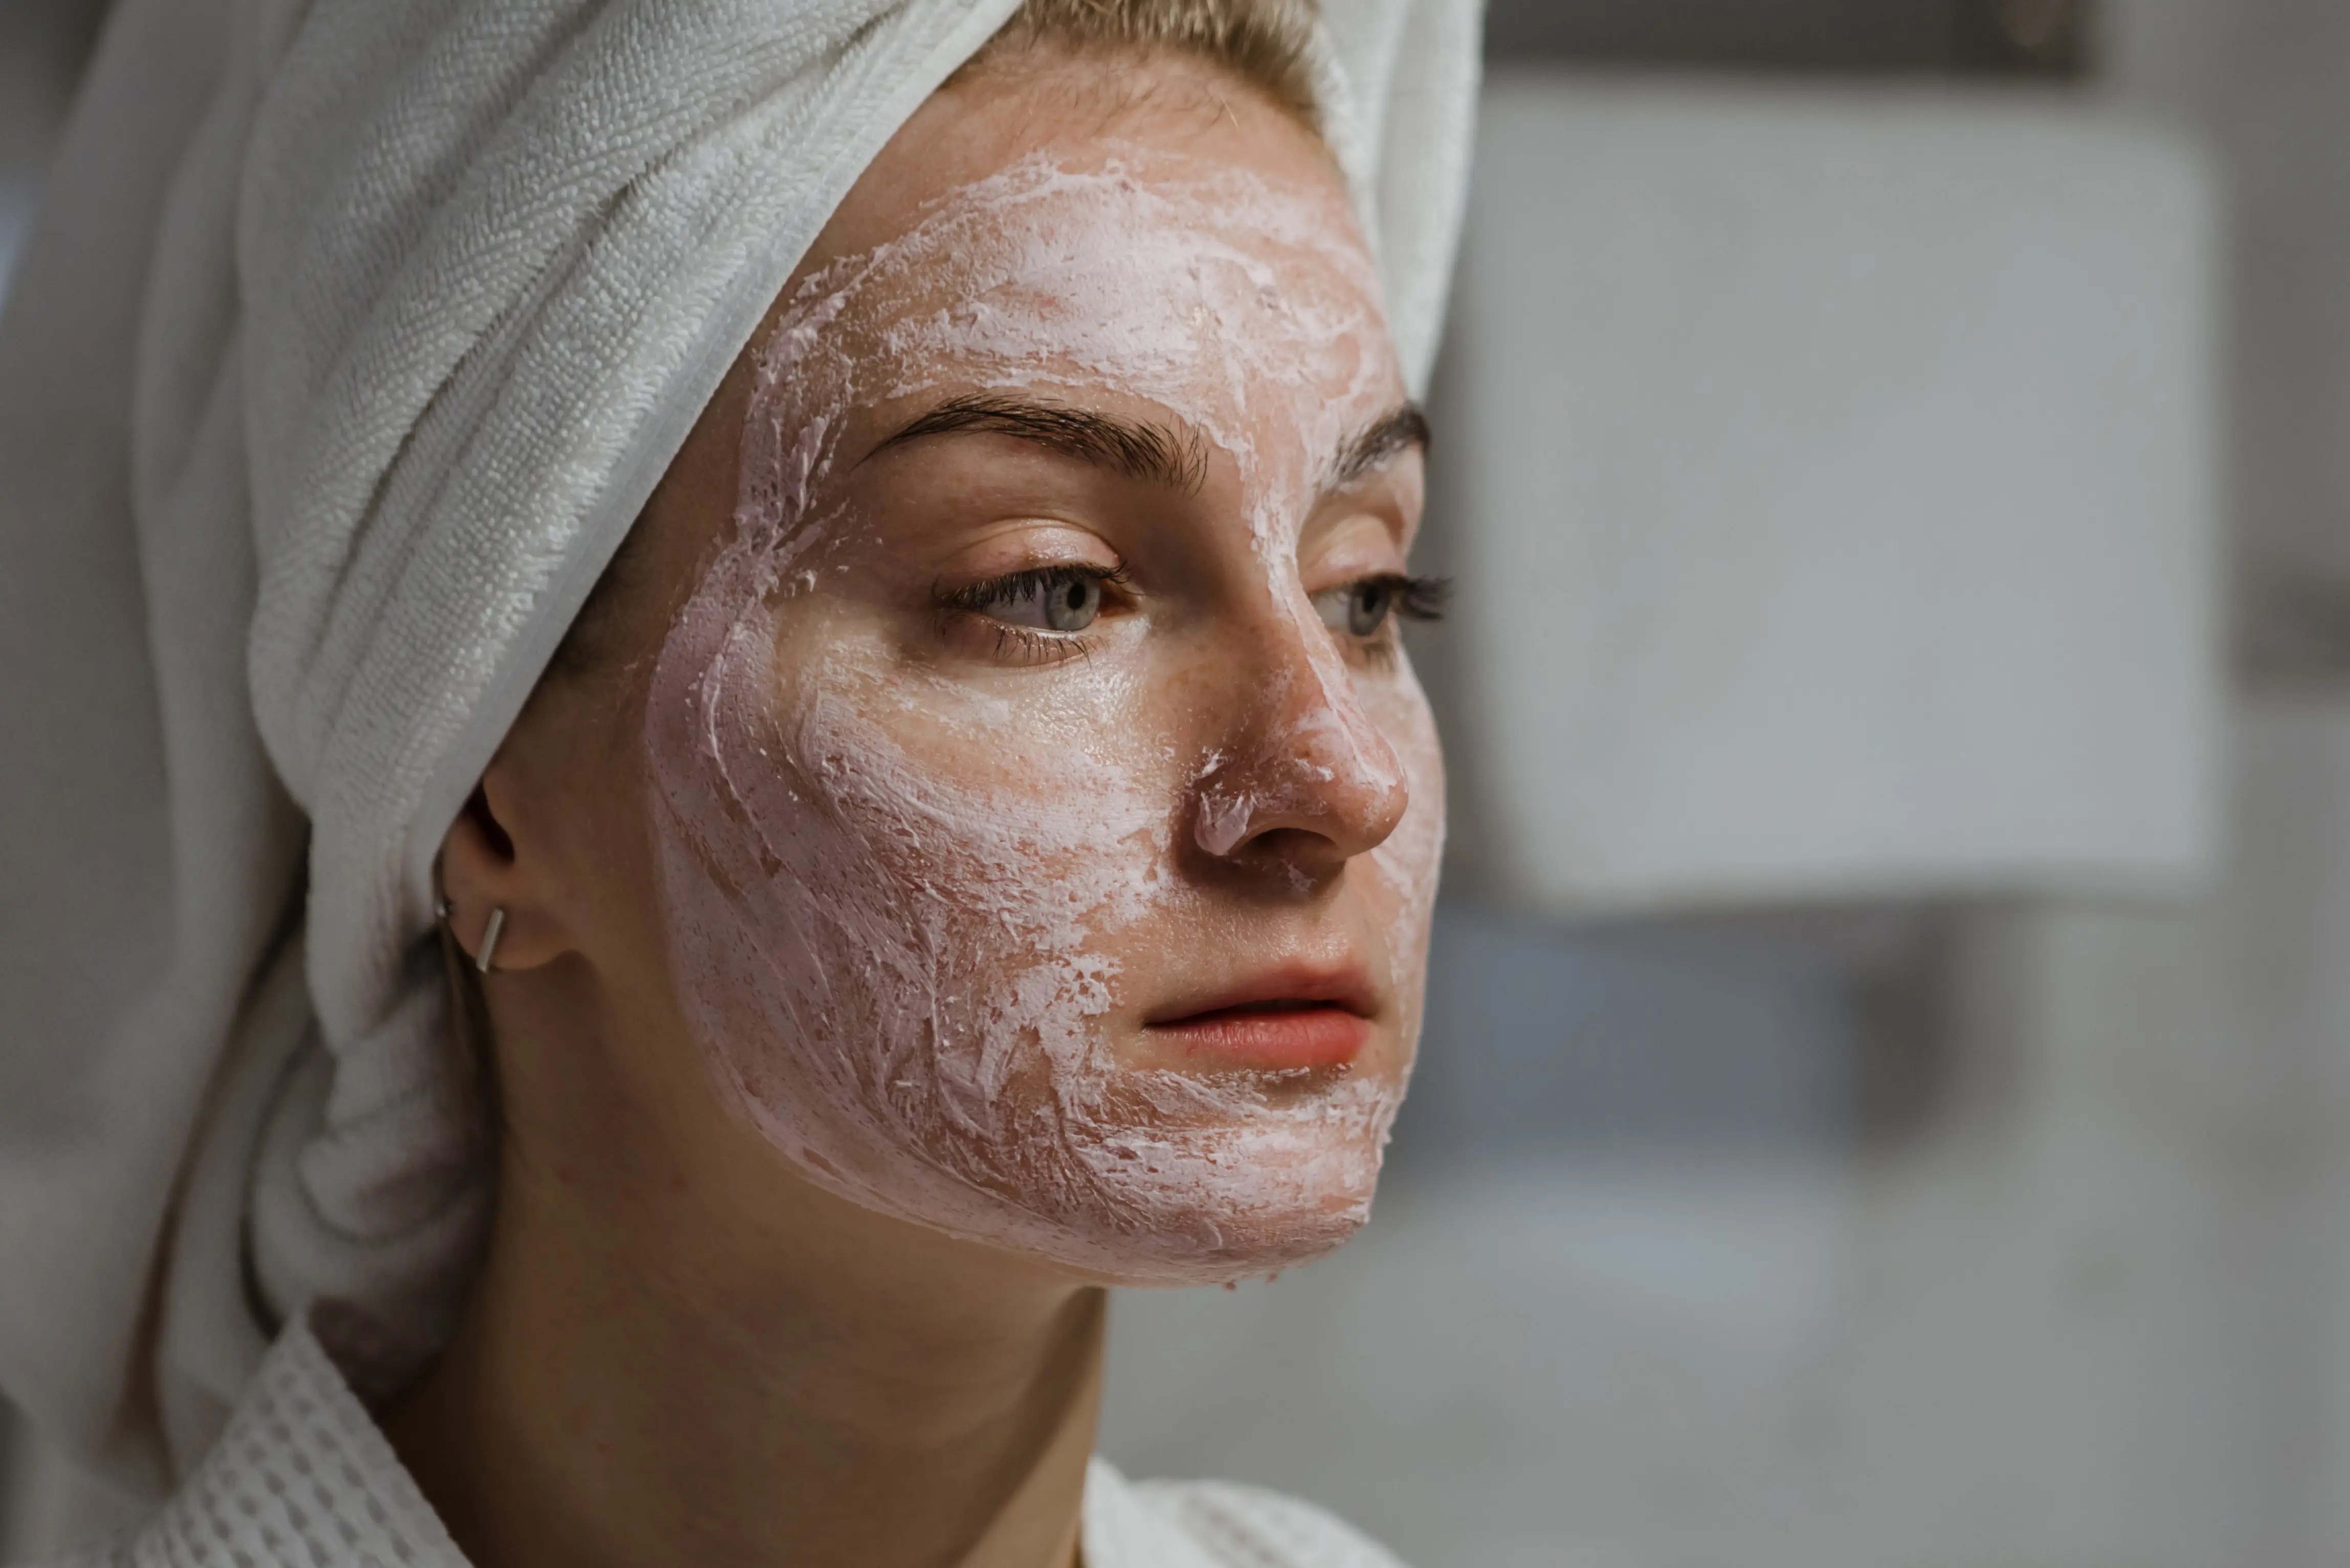 gram flour and rose water face pack gives 'these' amazing benefits